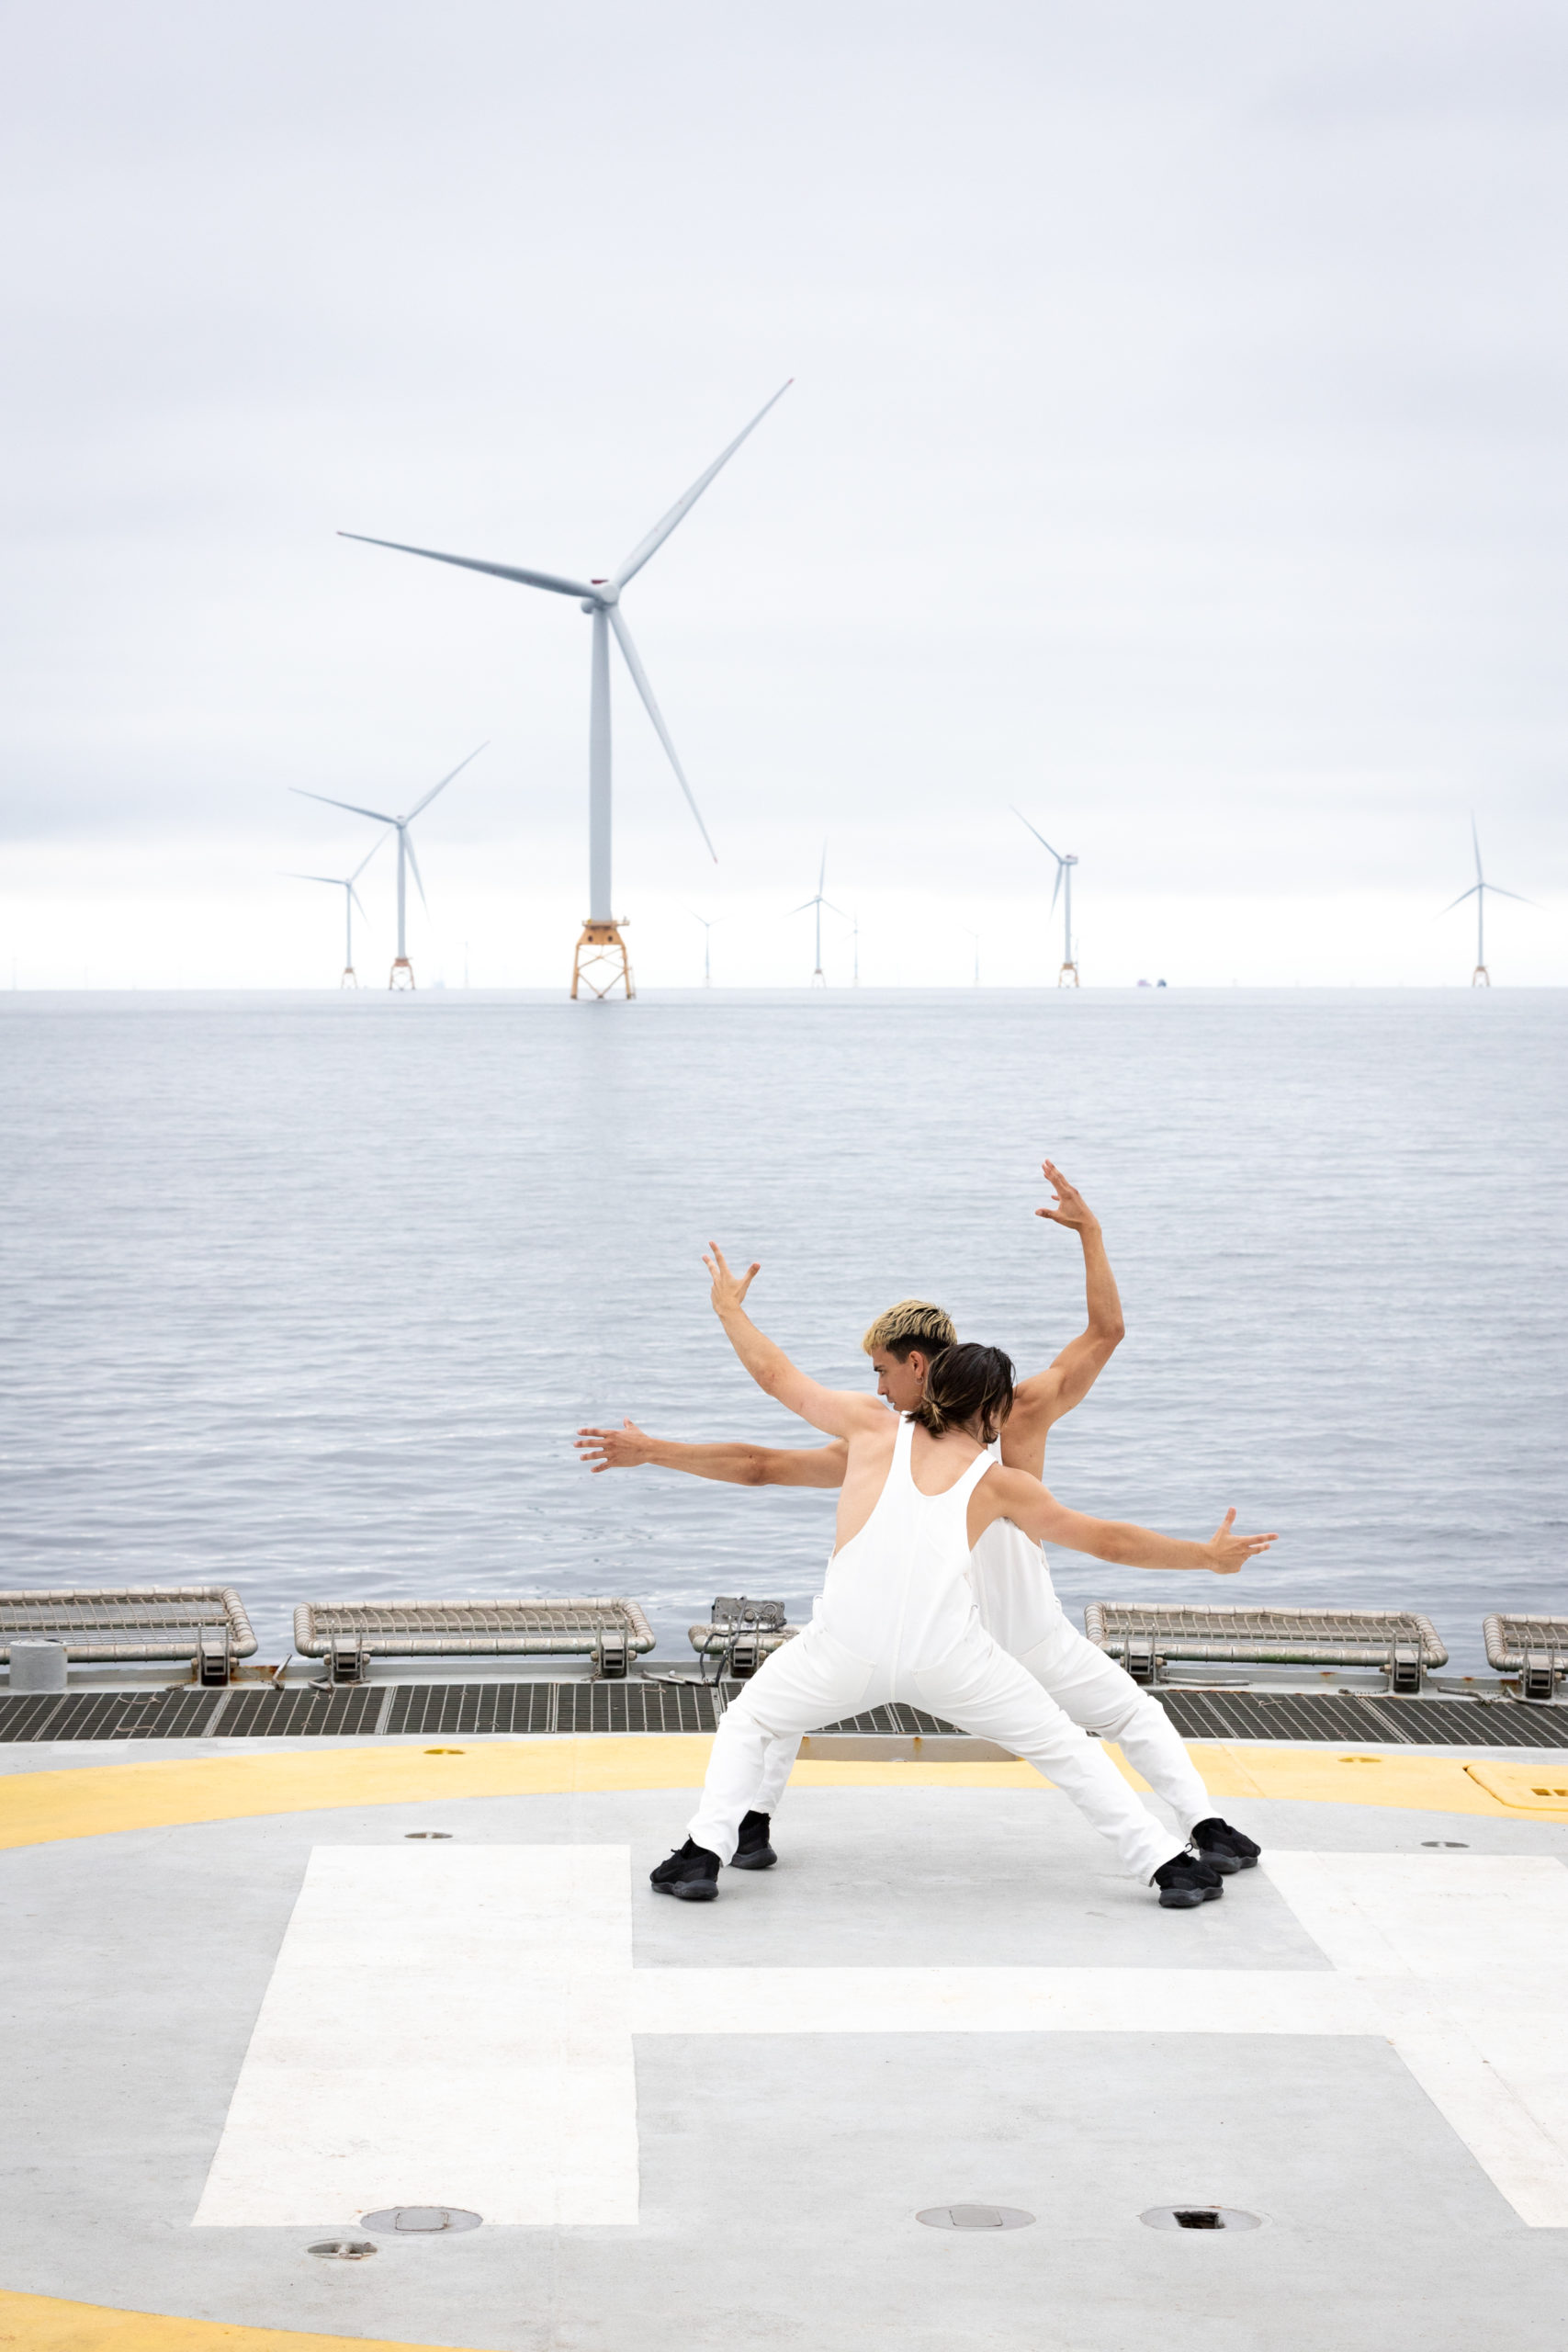 Two Dancers moving on a helicopter platform in the ocean. There are wind turbines along the horizon.